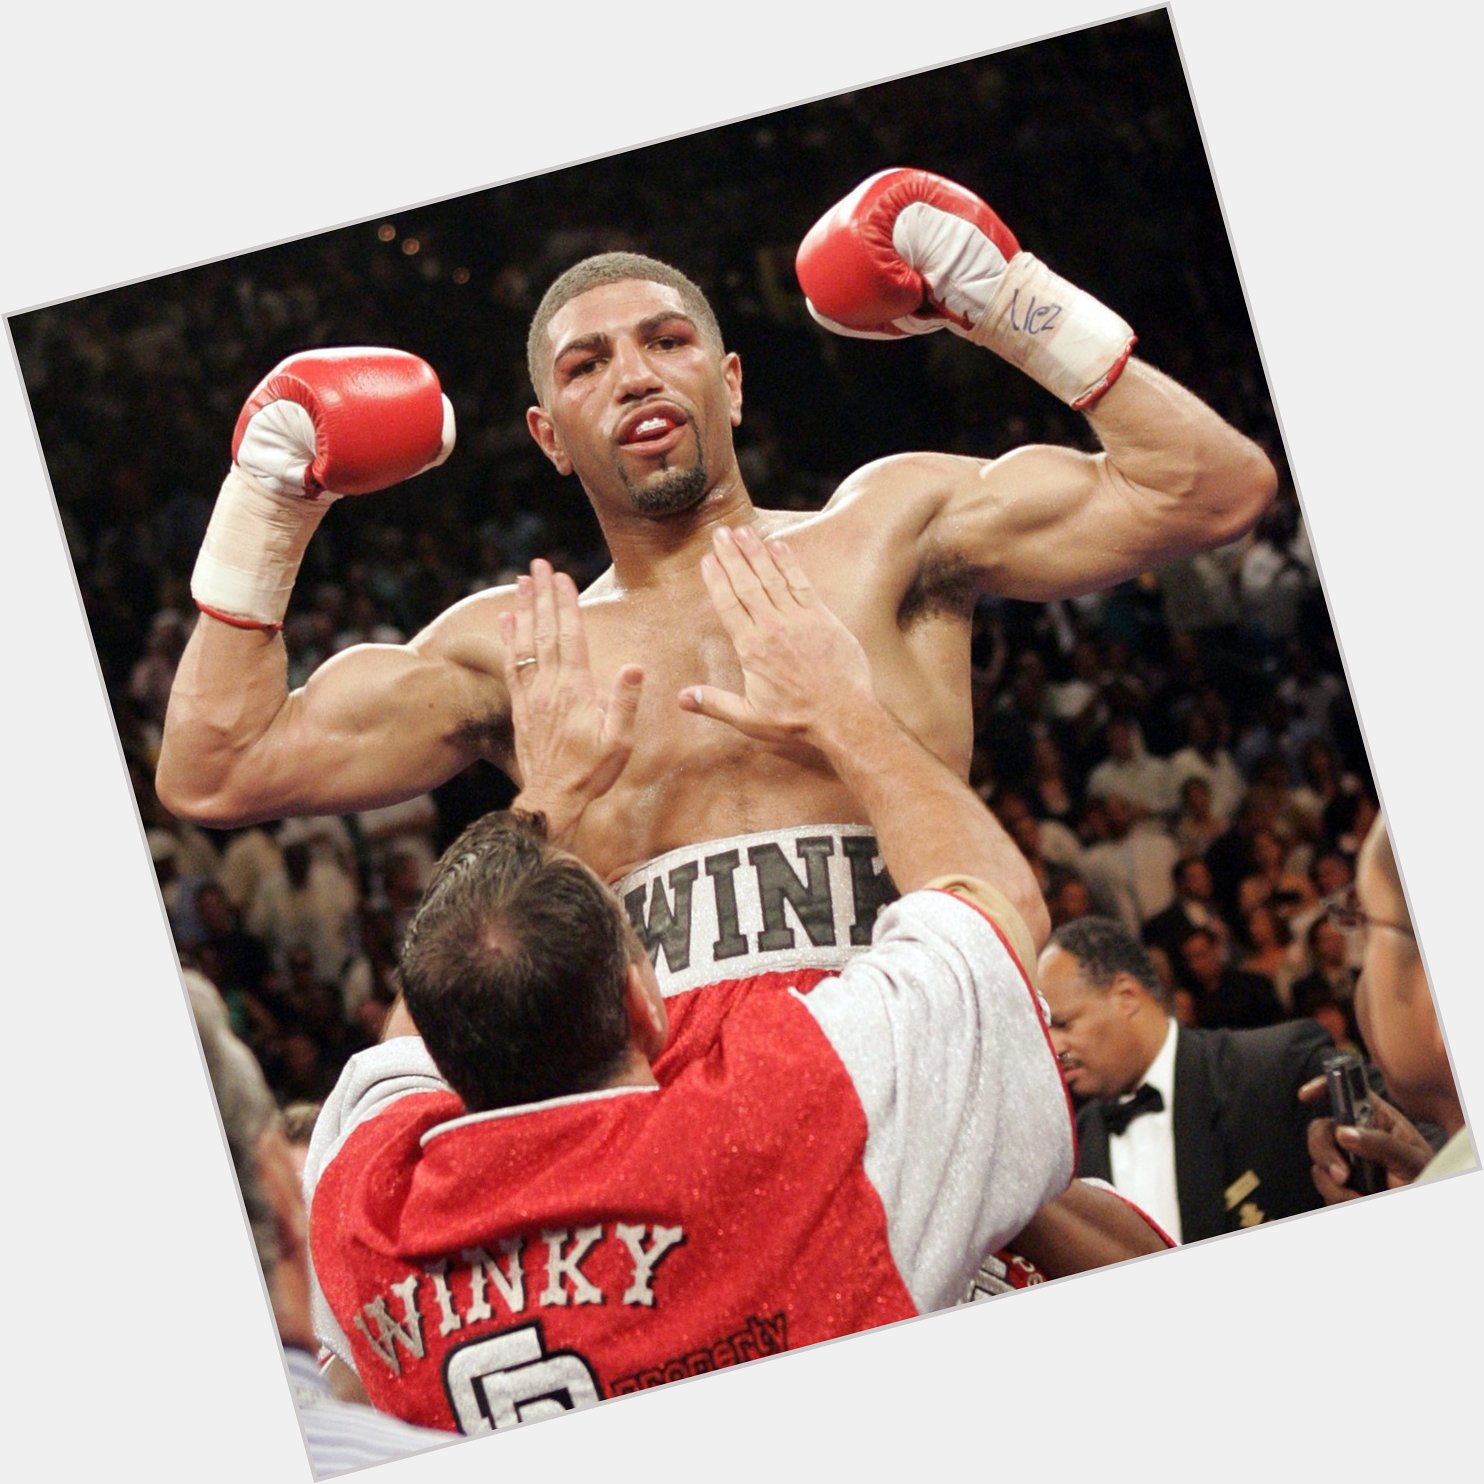 HAPPY BIRTHDAY WINKY! Wishing former undisputed super welterweight champ Ronald \"Winky\" Wright a great day 